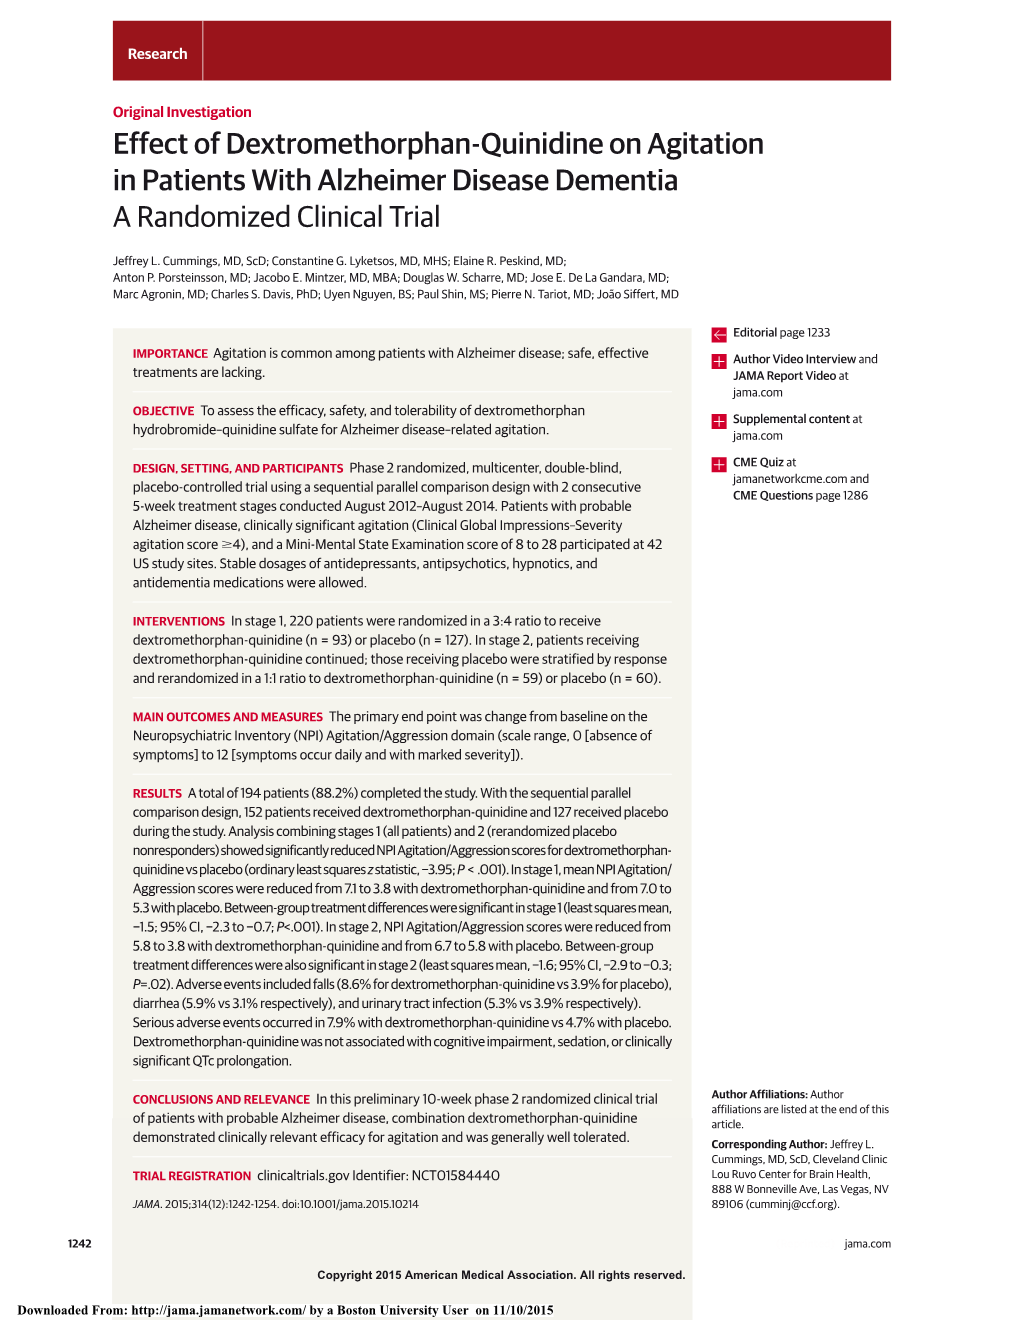 Effect of Dextromethorphan-Quinidine on Agitation in Patients with Alzheimer Disease Dementia a Randomized Clinical Trial